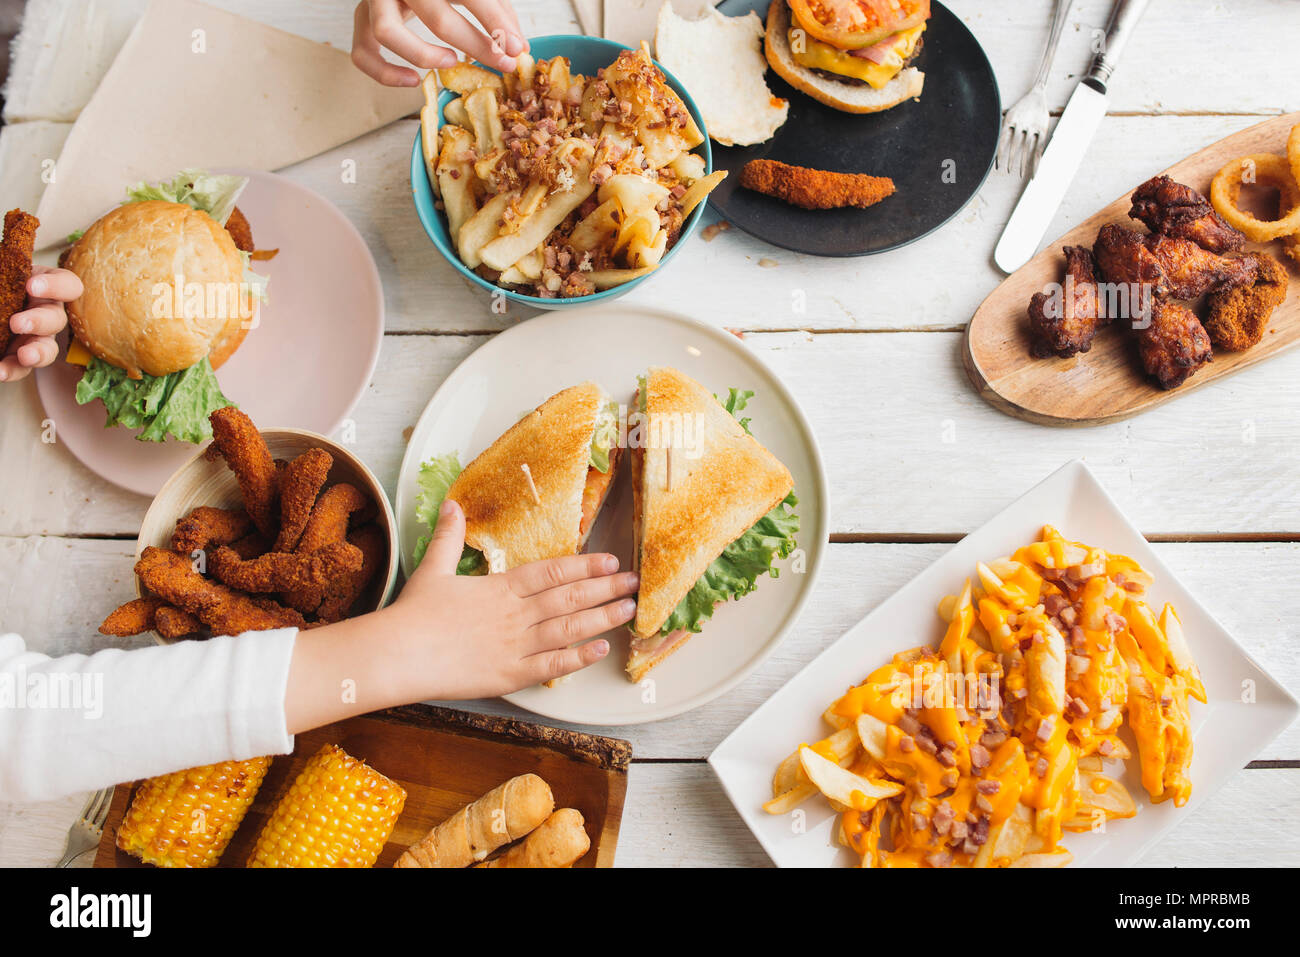 Children's hands on table full of American food Stock Photo